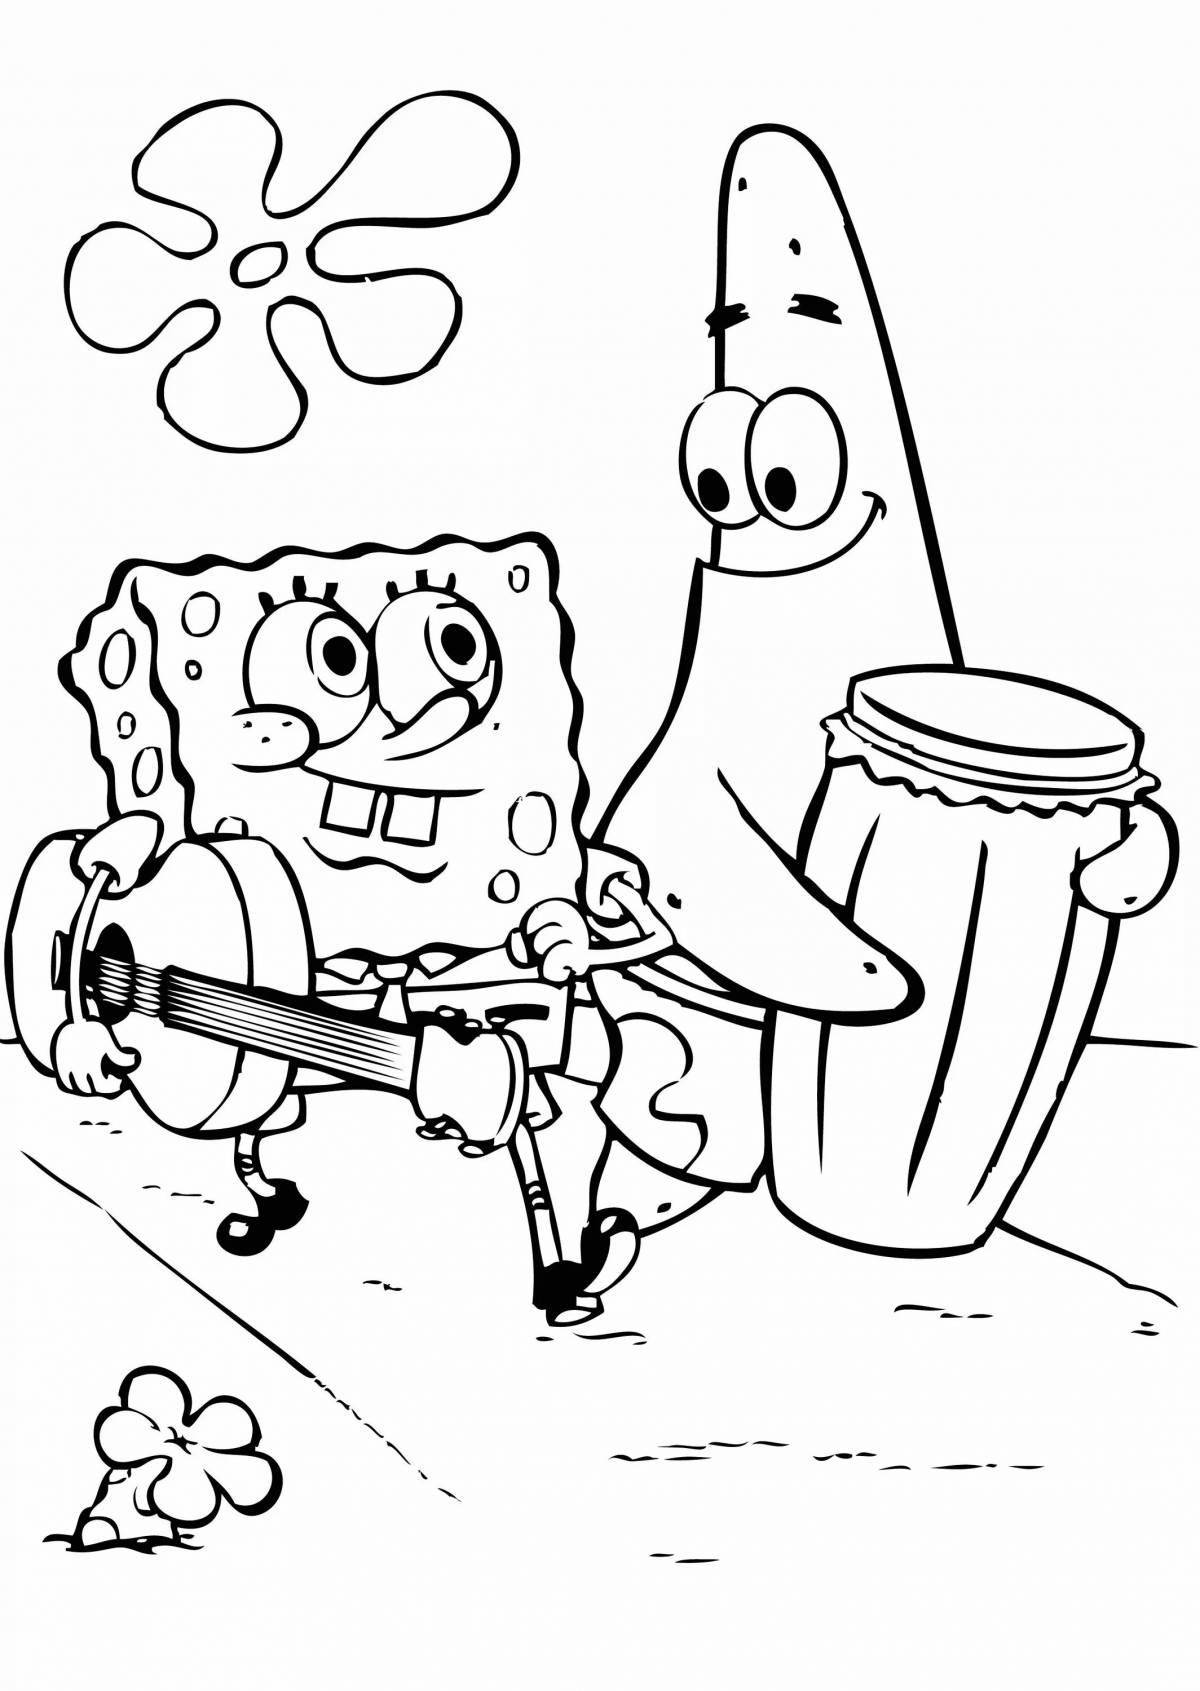 Lucky coloring page - великолепно